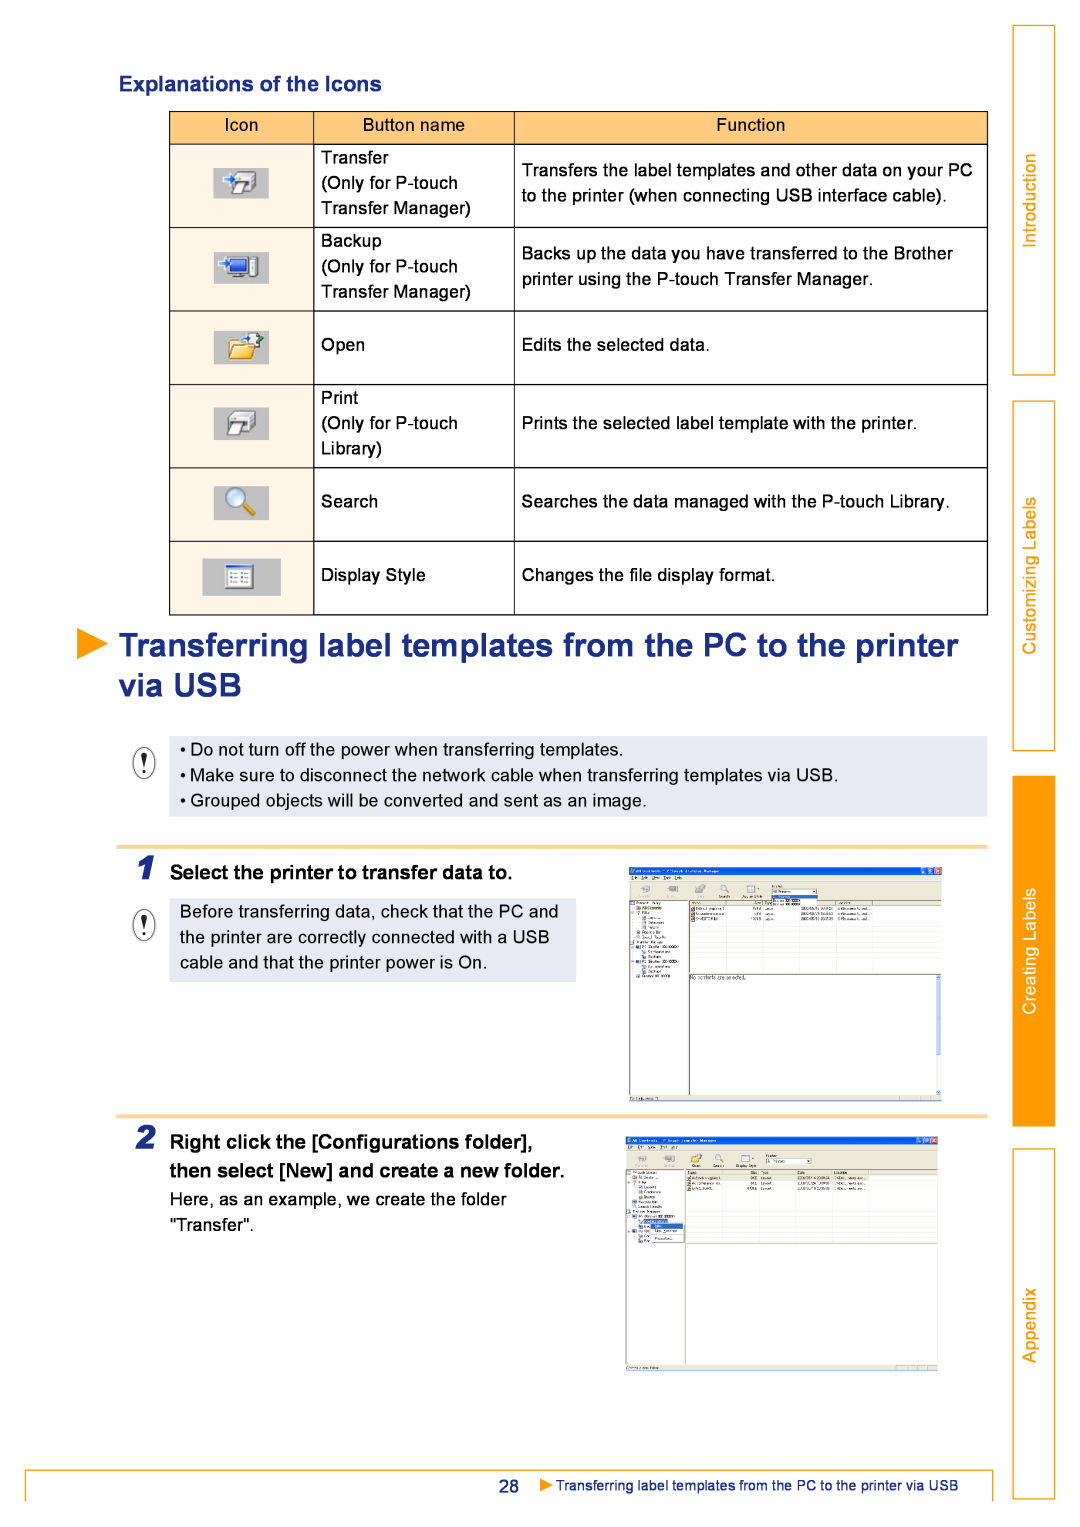 Brother TD-4000 Transferring label templates from the PC to the printer via USB, Explanations of the Icons, Appendix 